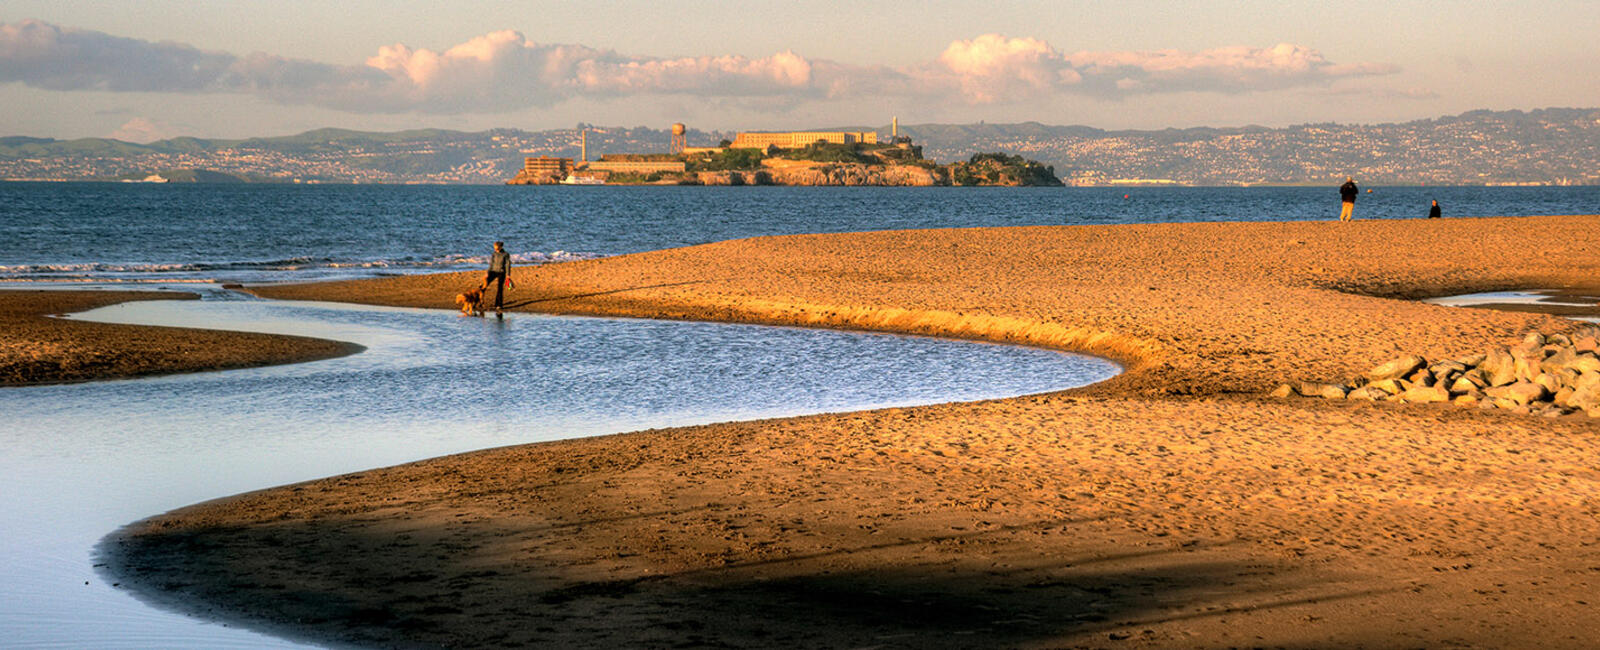 People enjoy East Beach at Crissy Field, with Alcatraz Island in the distance.